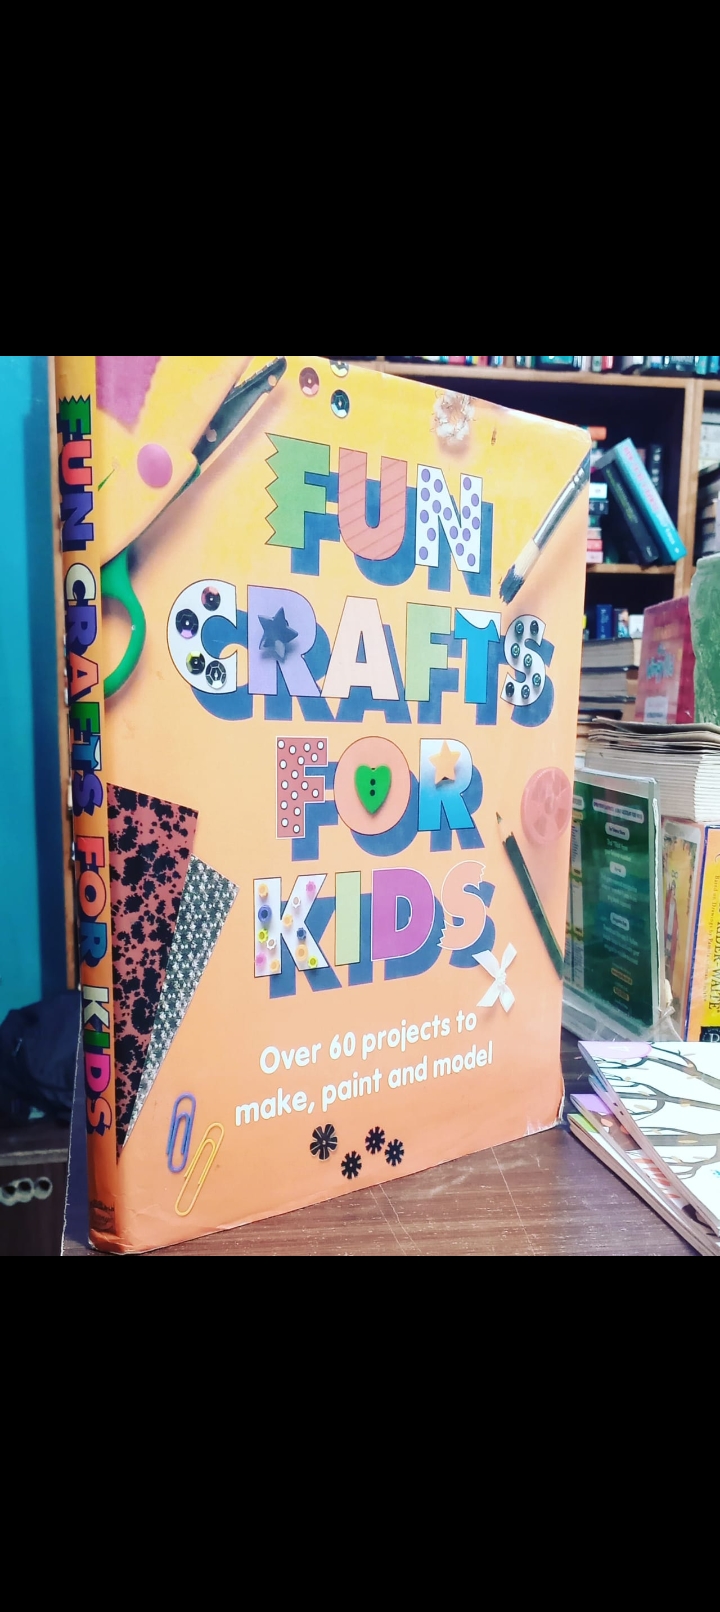 fun crafts for kids. over 60 projects to make, paint and model. original hardcover